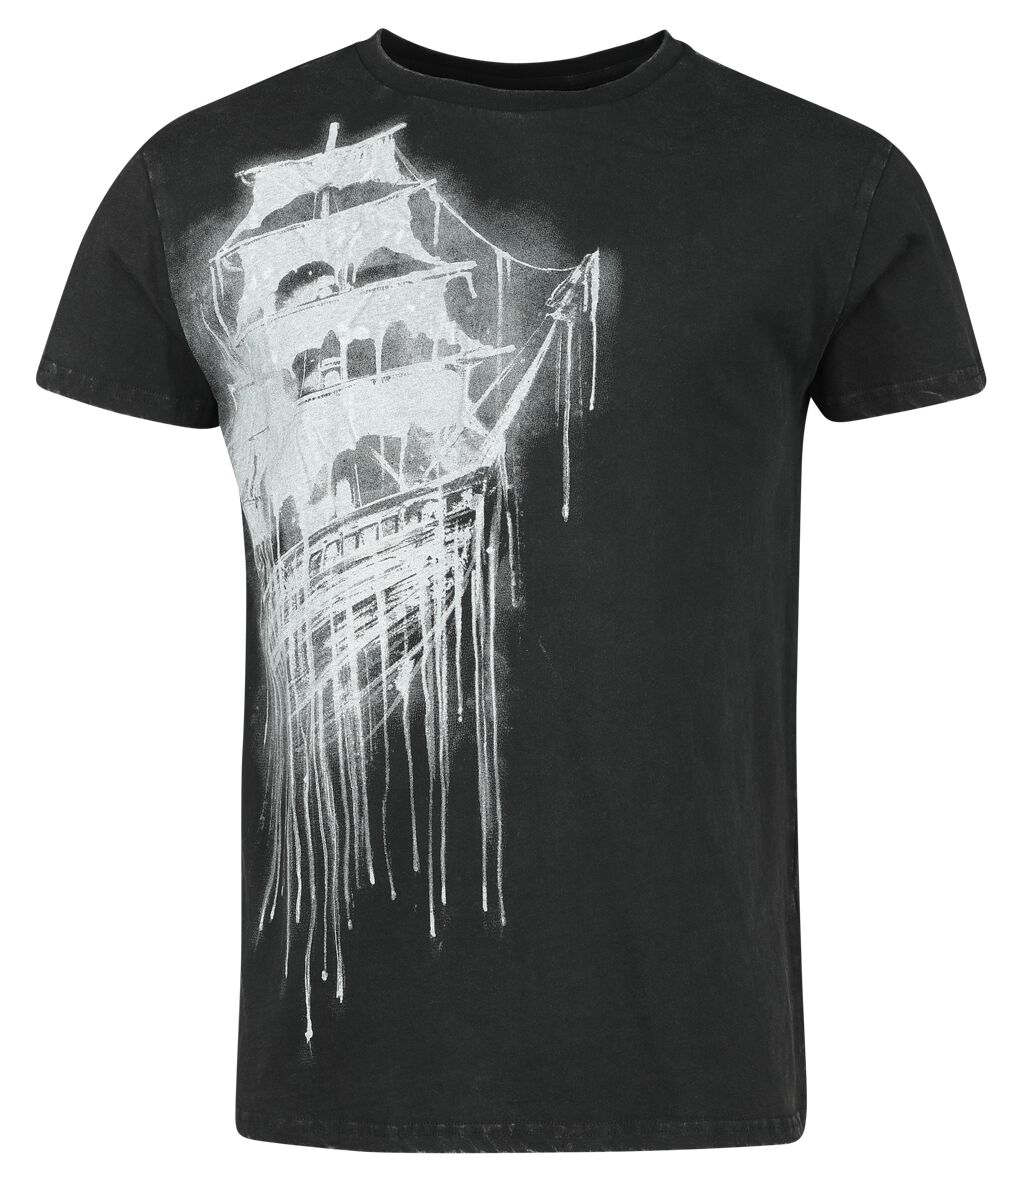 Black Premium by EMP T-Shirt with Ghost Ship Print T-Shirt schwarz in XL von Black Premium by EMP